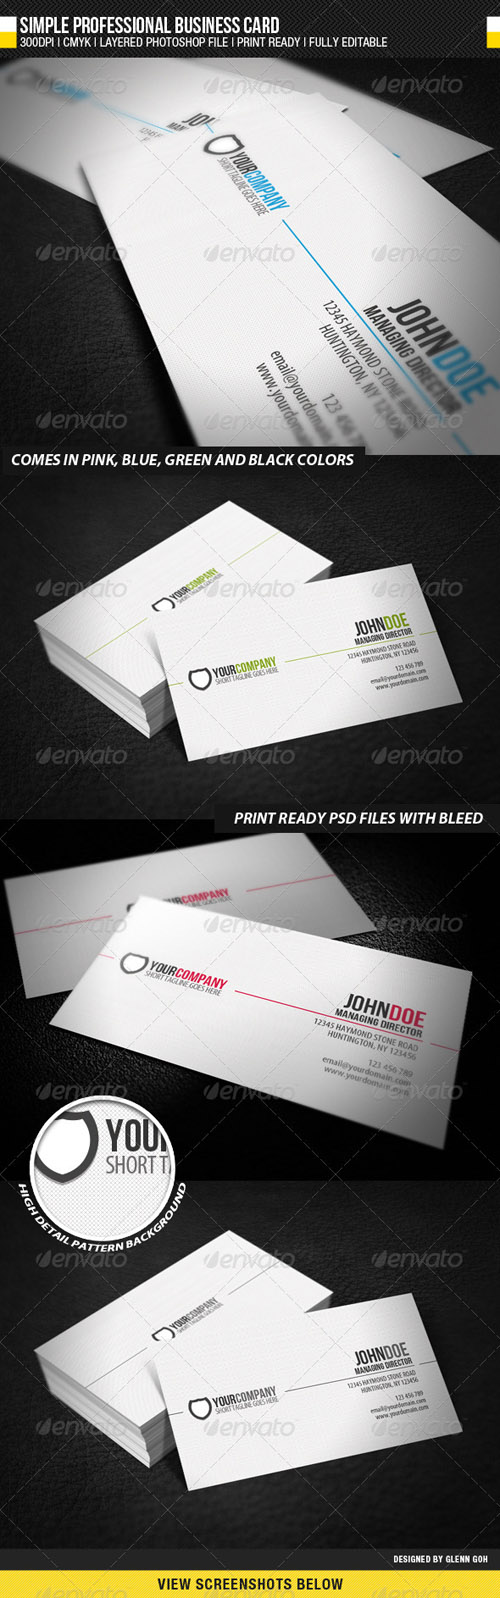 Graphicriver - Simple Professional Business Card